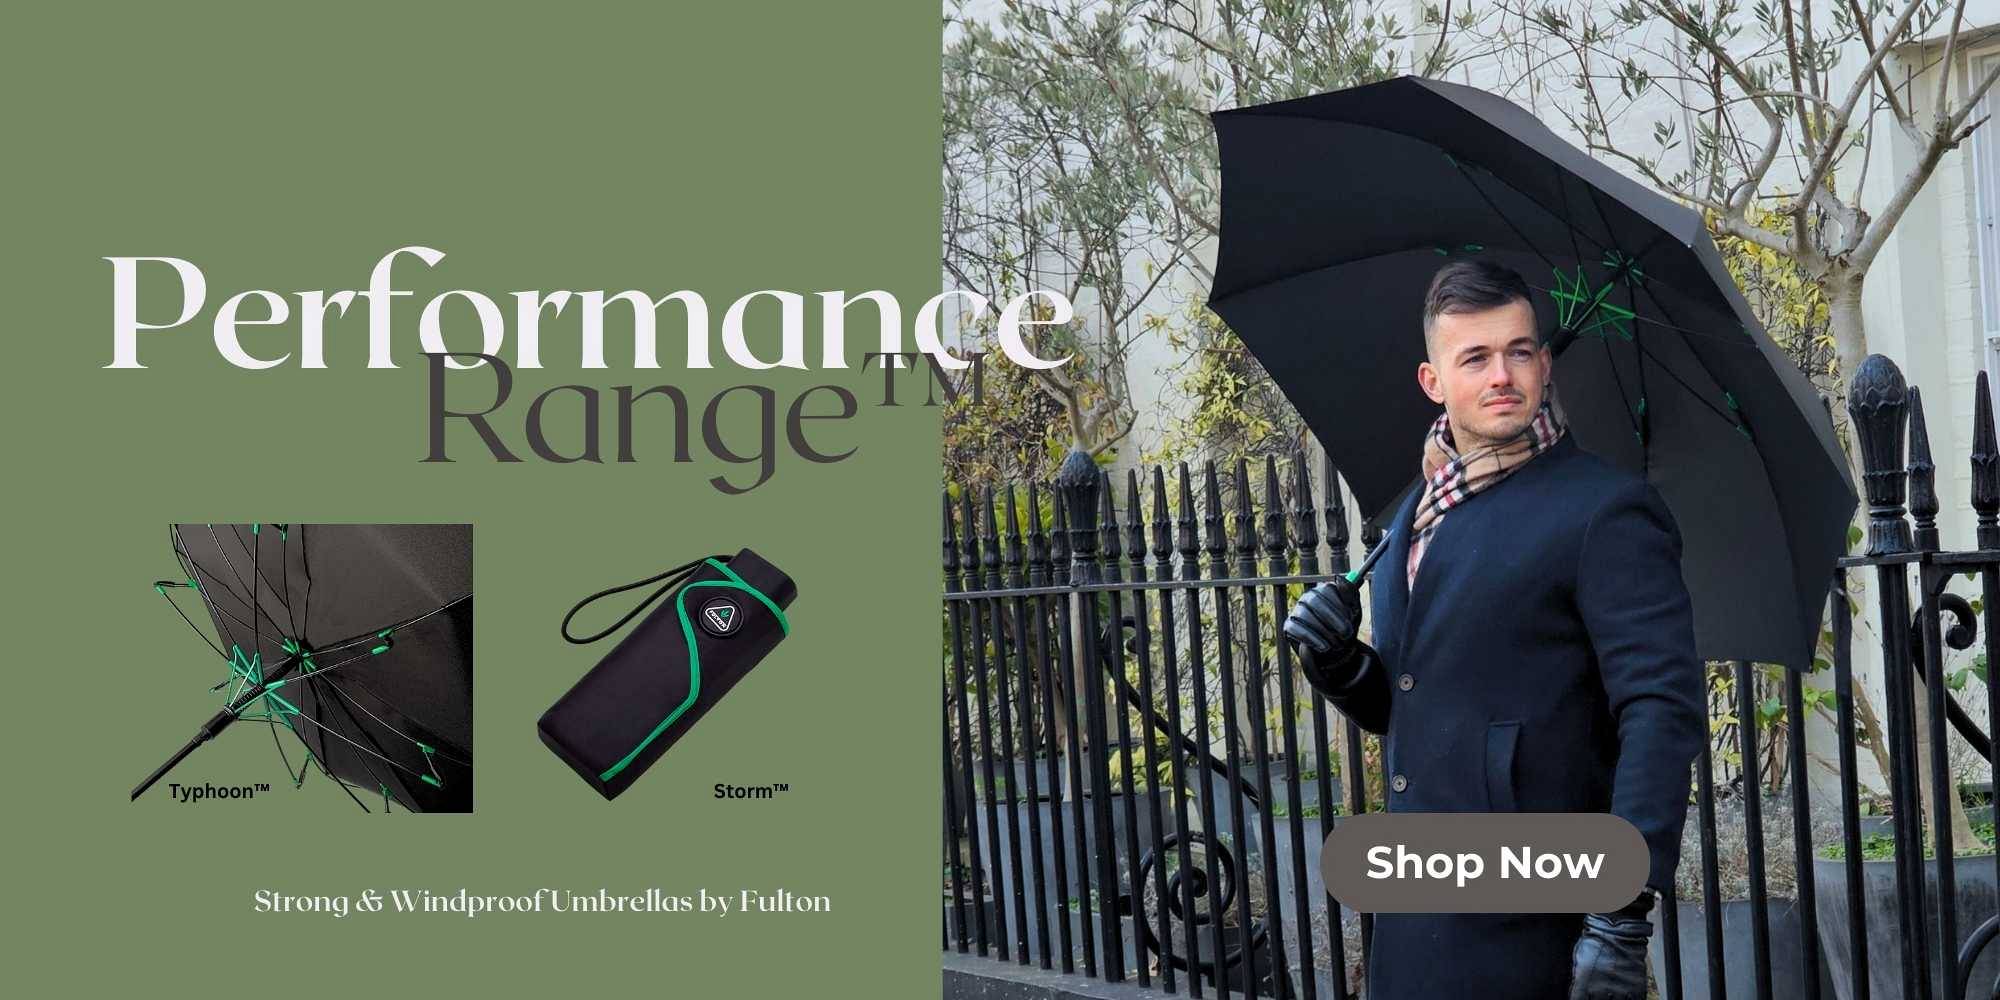 Strong & Windproof Umbrellas by Fulton